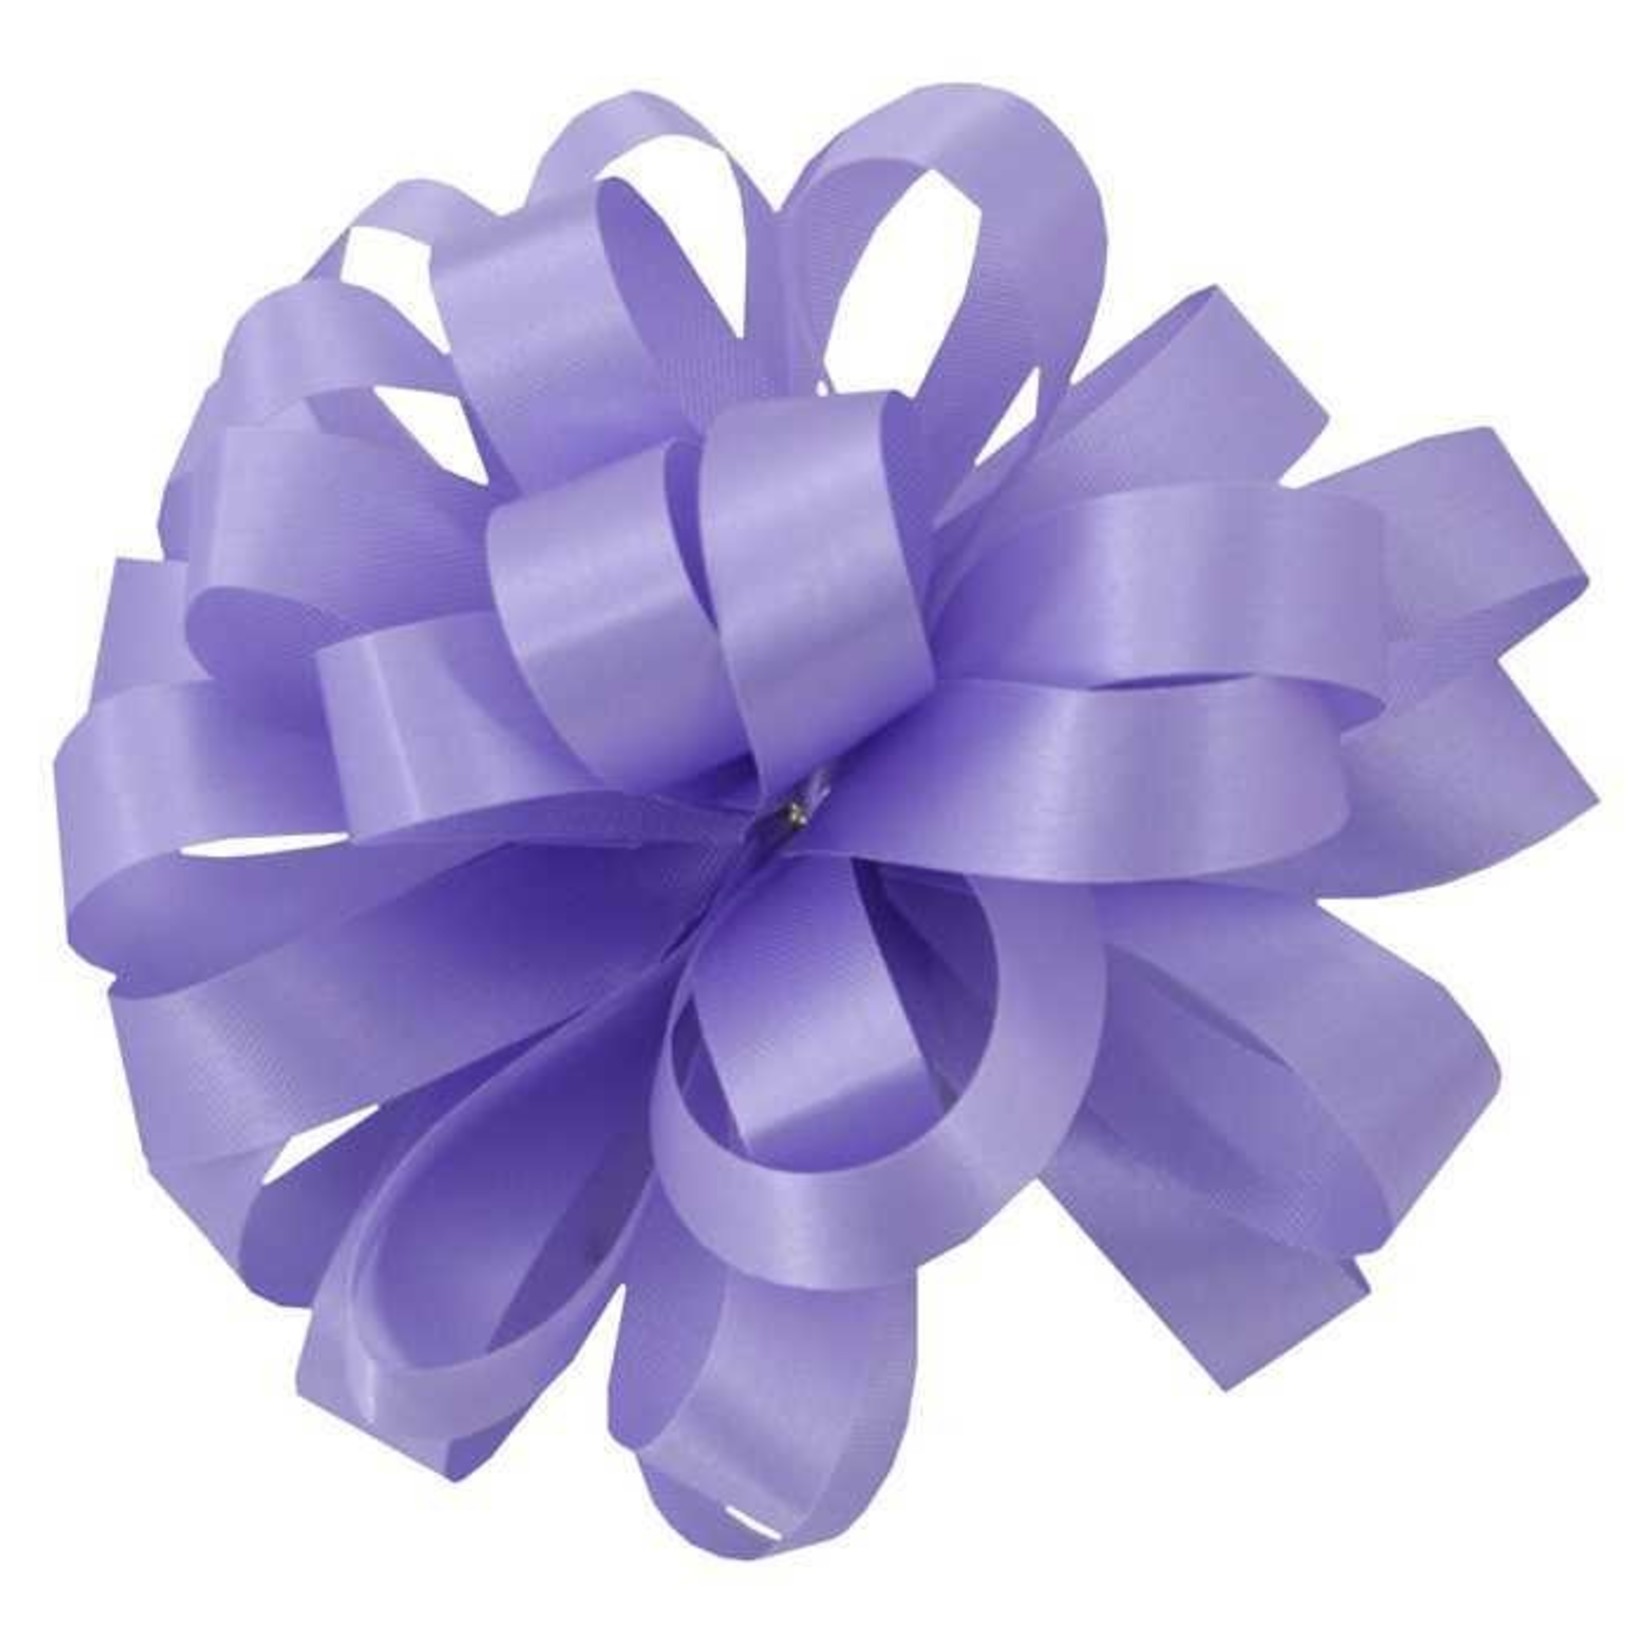 2.5" PERFECT BOW PERIWINKLE #40